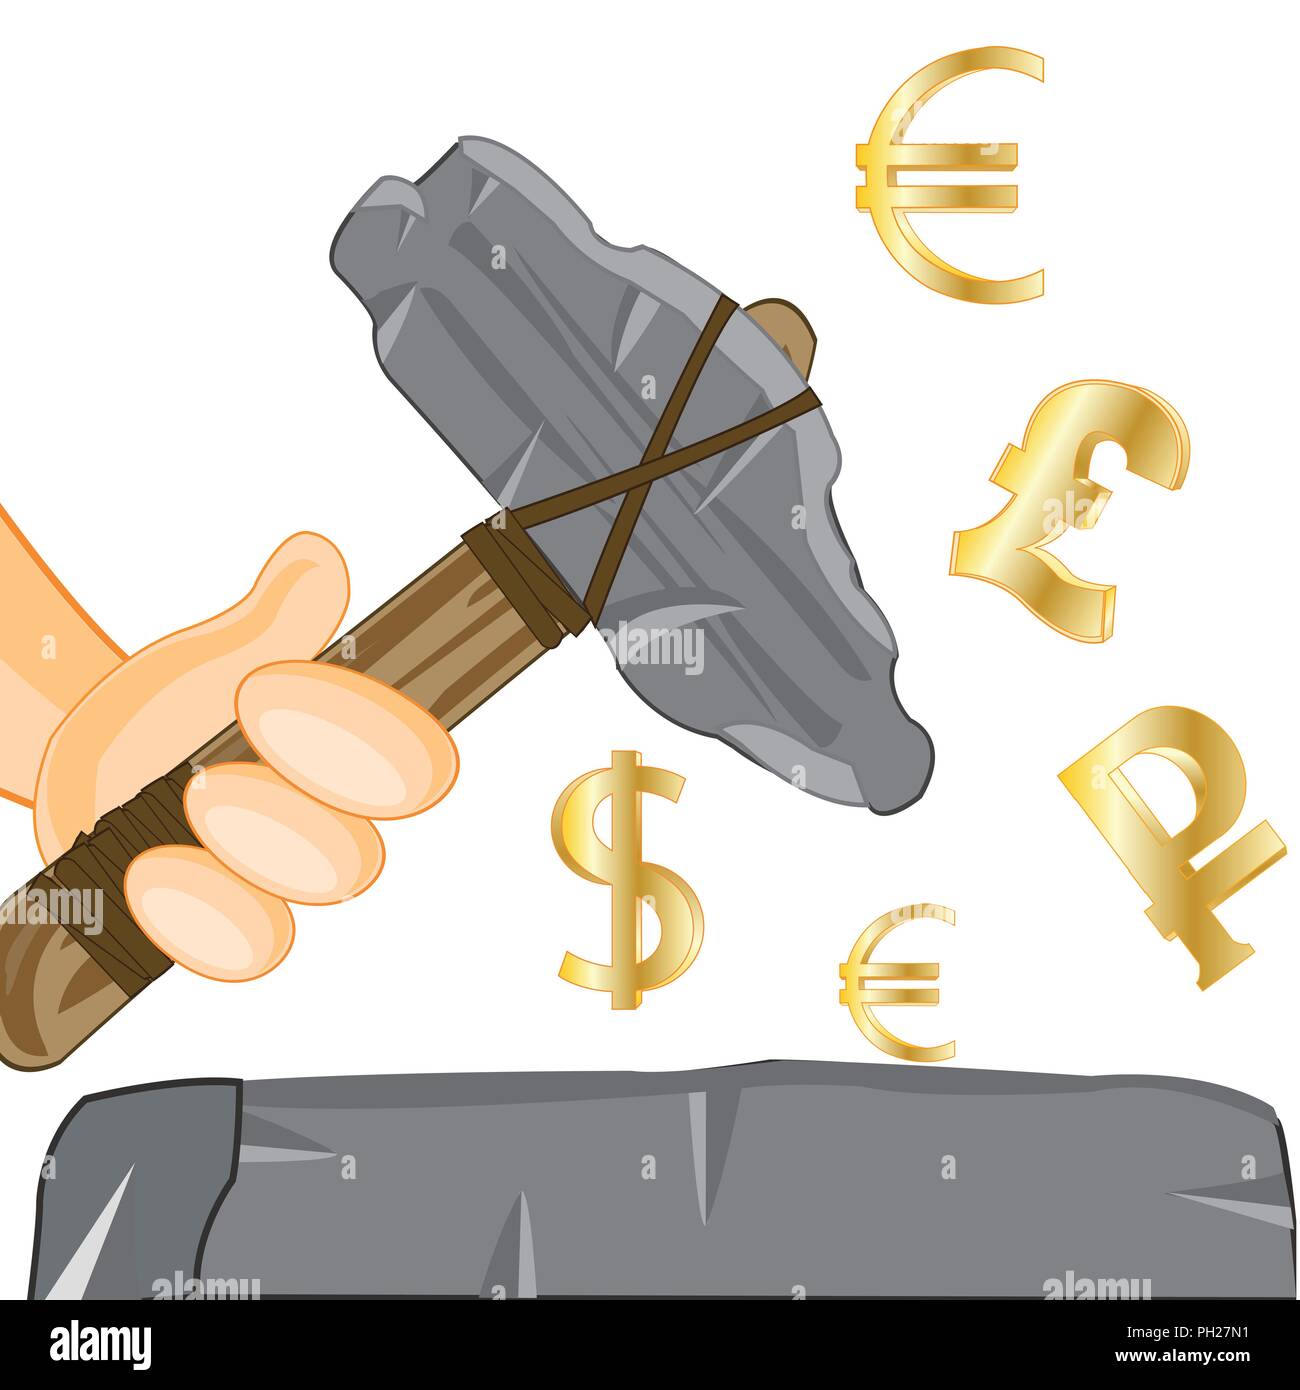 Stone axe in hand and money signs Stock Vector